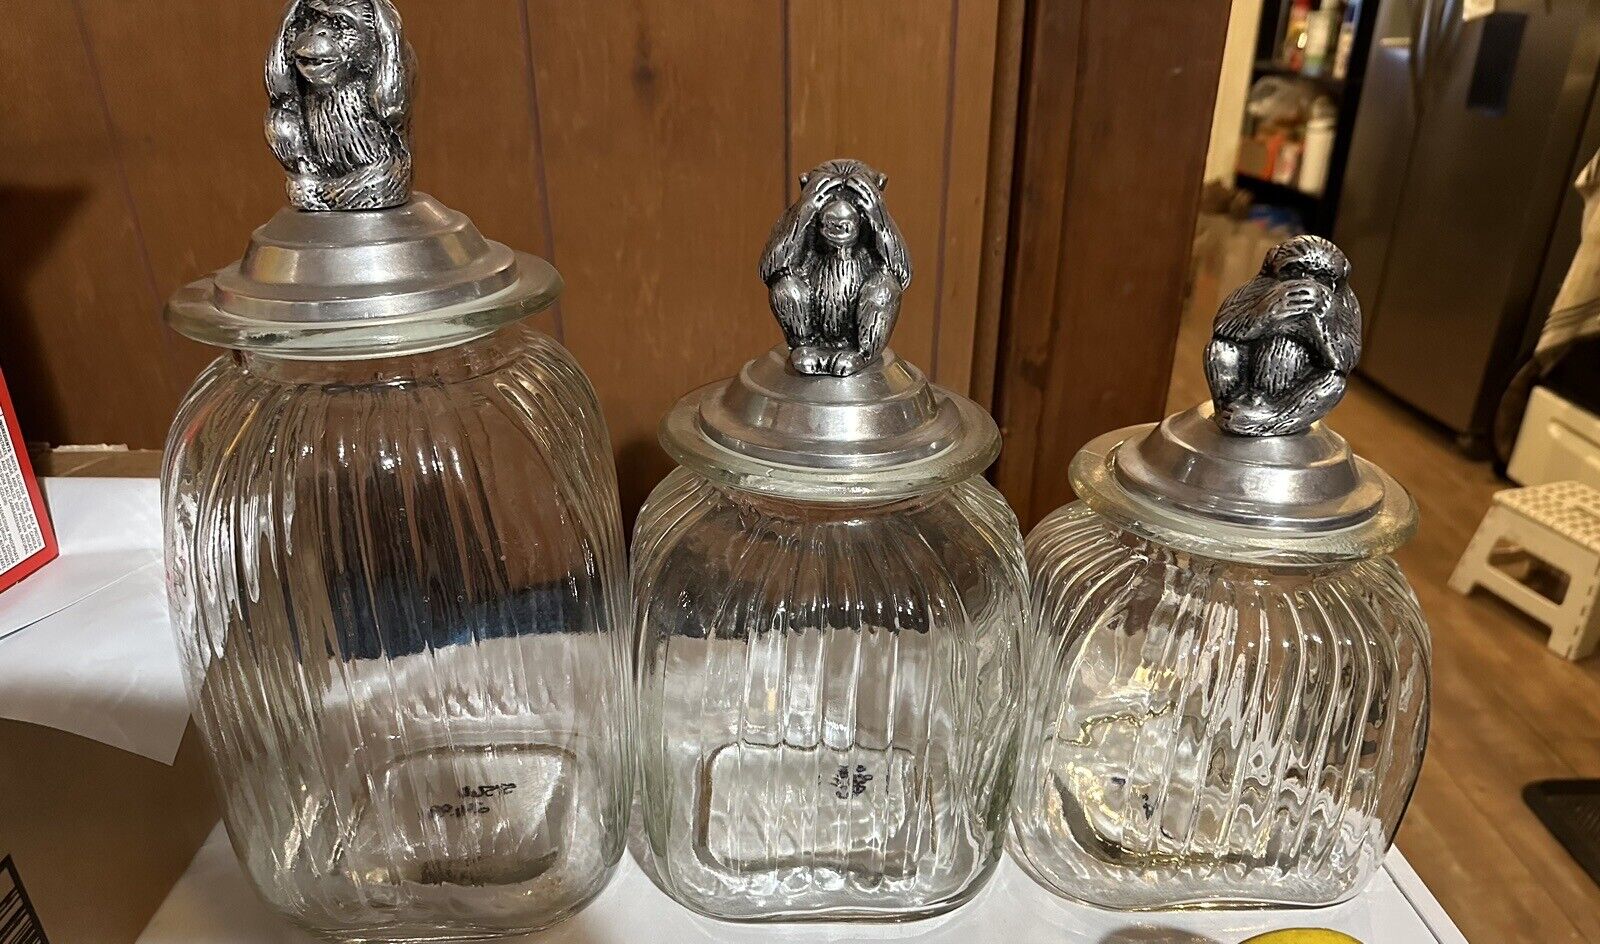 Vintage Evil monkey ribbed glass storage containers